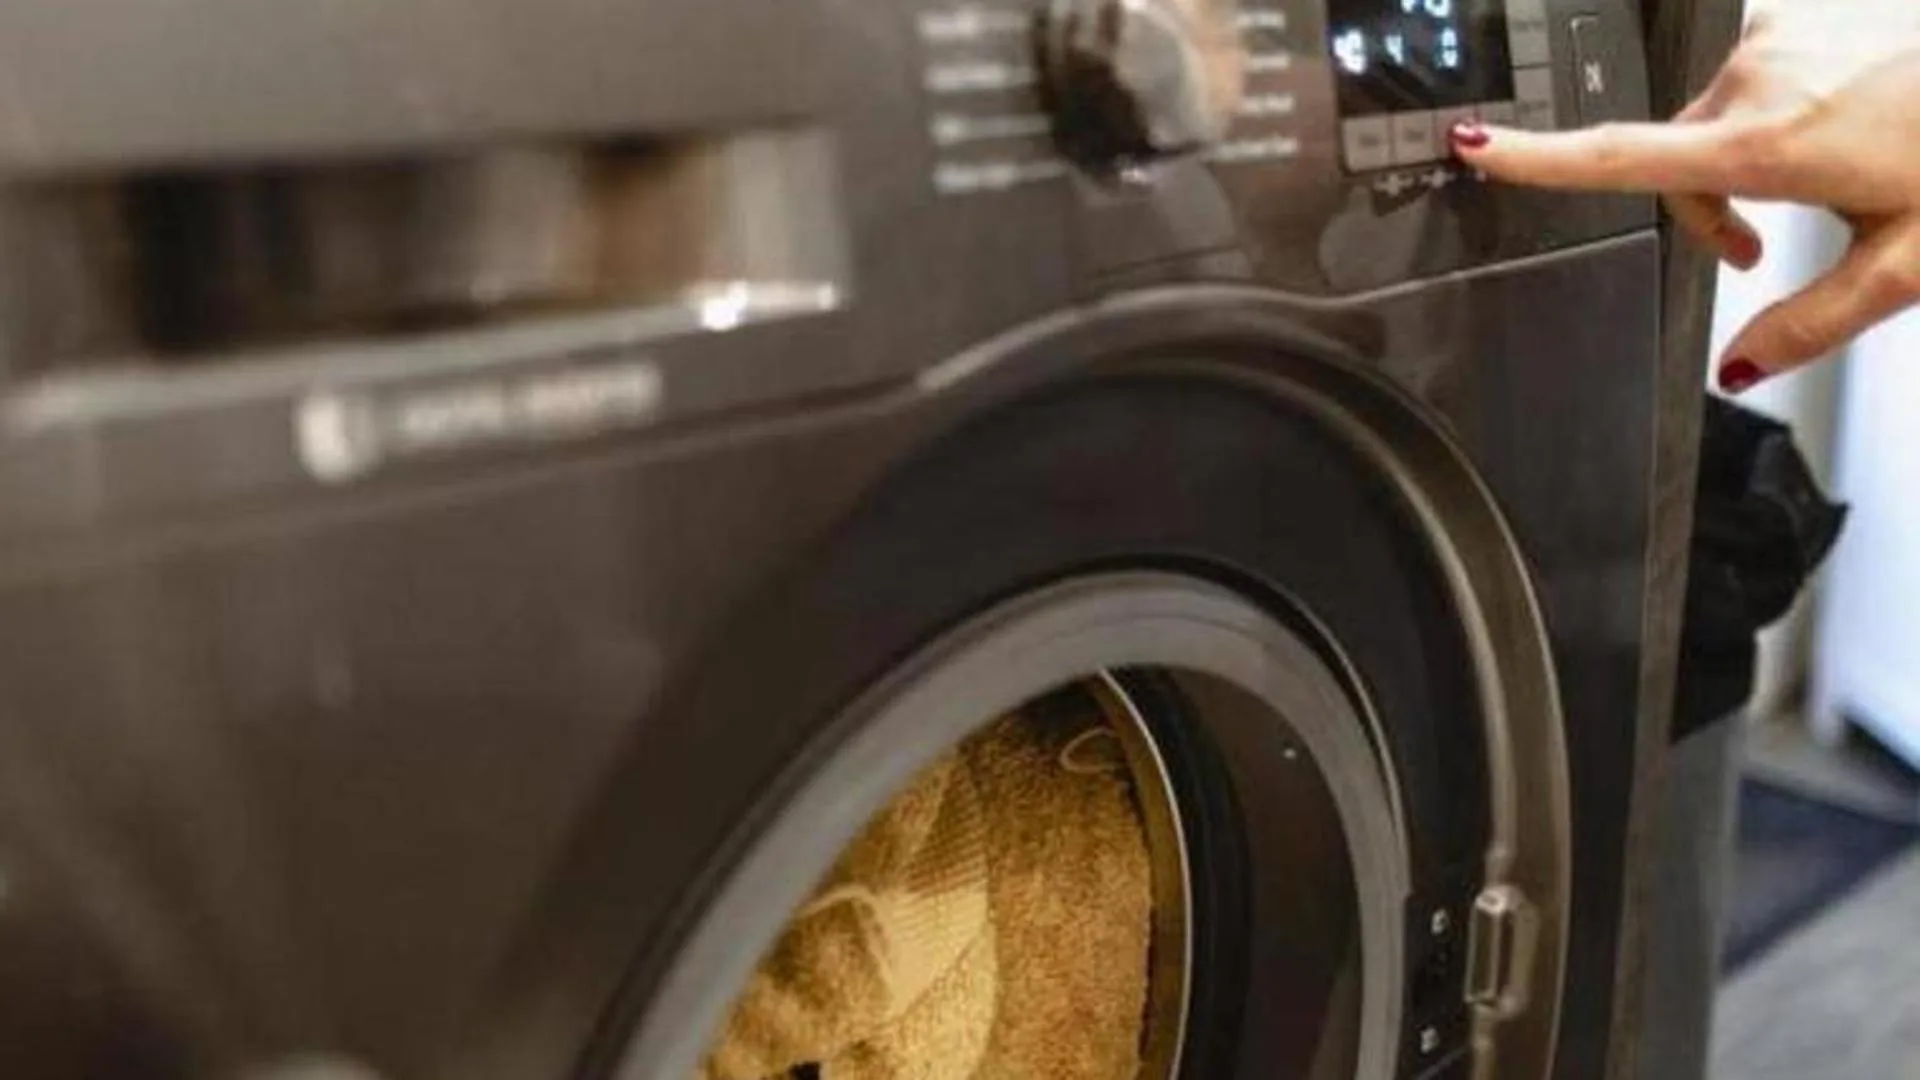 Price of electricity: Save on your electricity bill today by putting the washing machine on at this time